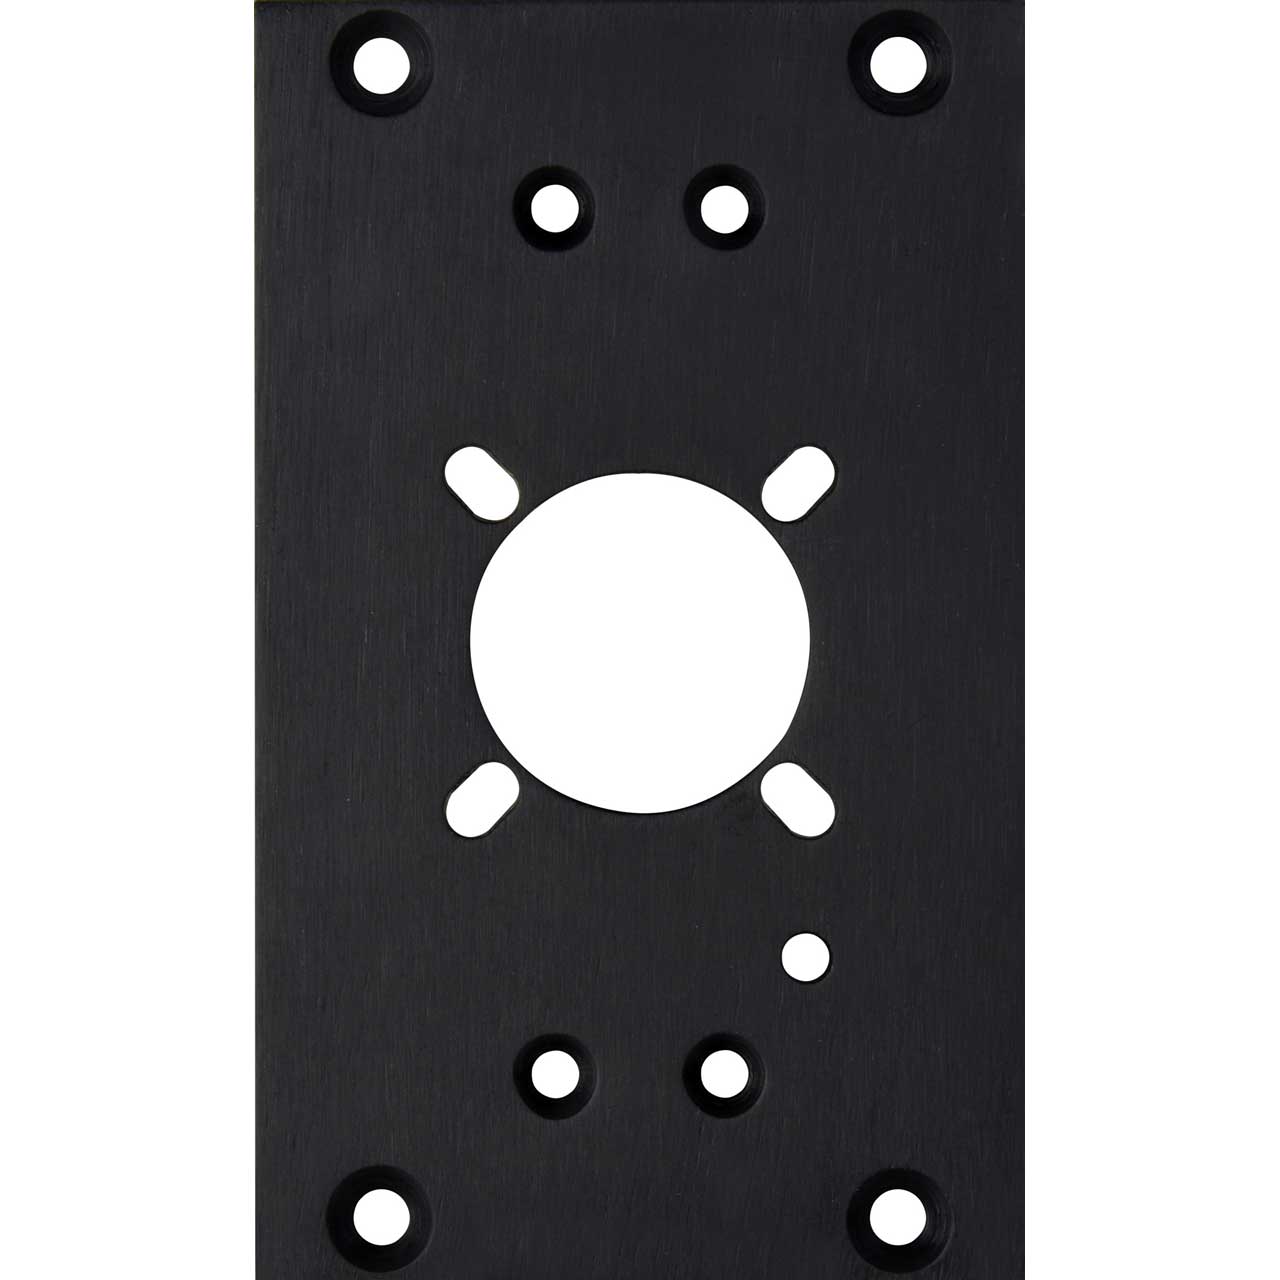 Camplex HF-2RFP-SMPTE Pre-Punched Front Panel for LEMO SMPTE Plug for use in HYMOD-FR2 Frame